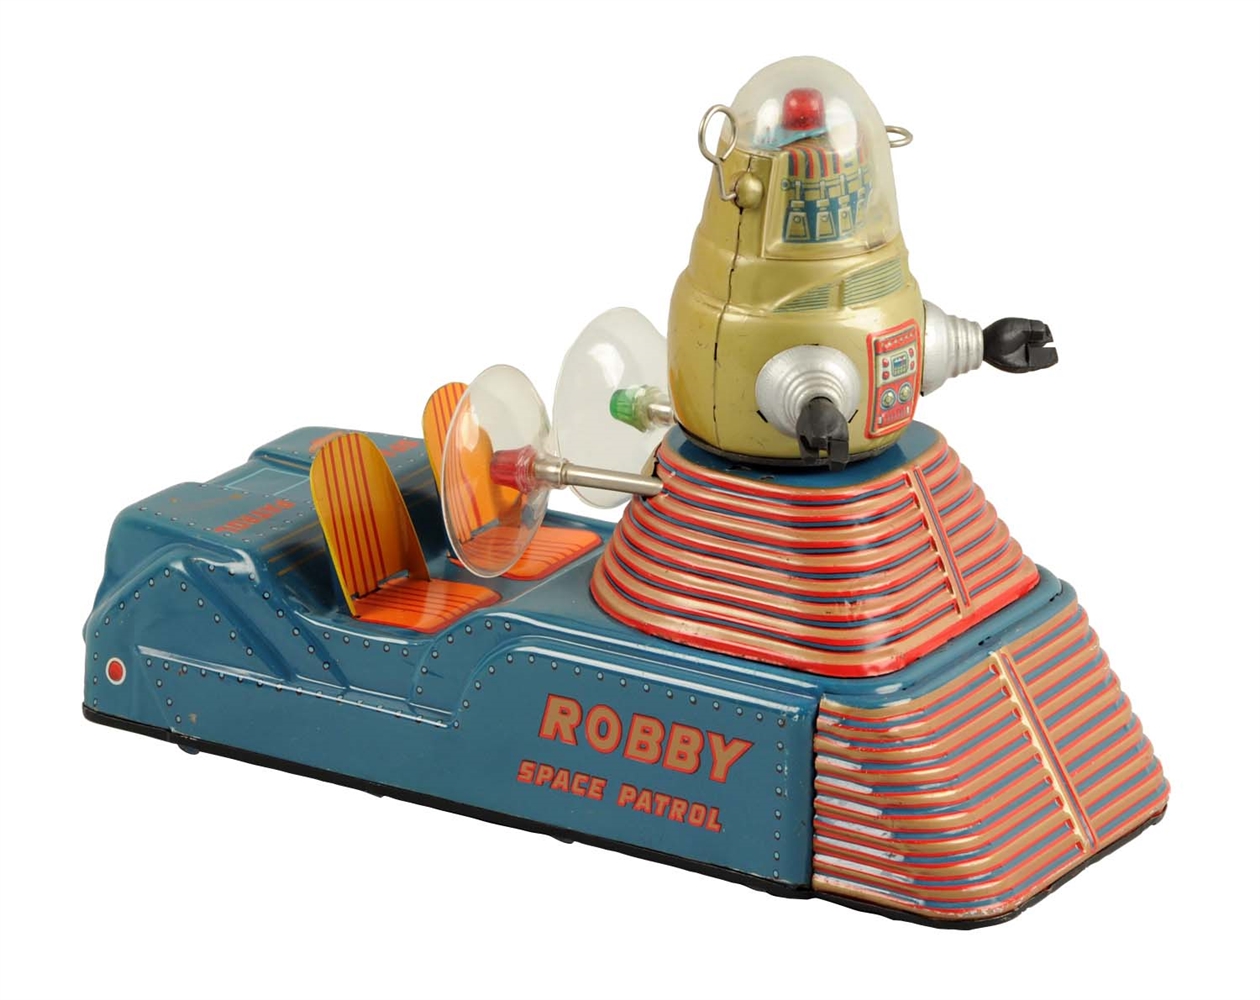 JAPANESE TIN LITHO BATTERY OPERATED ROBBY SPACE PATROL ROBOT. 